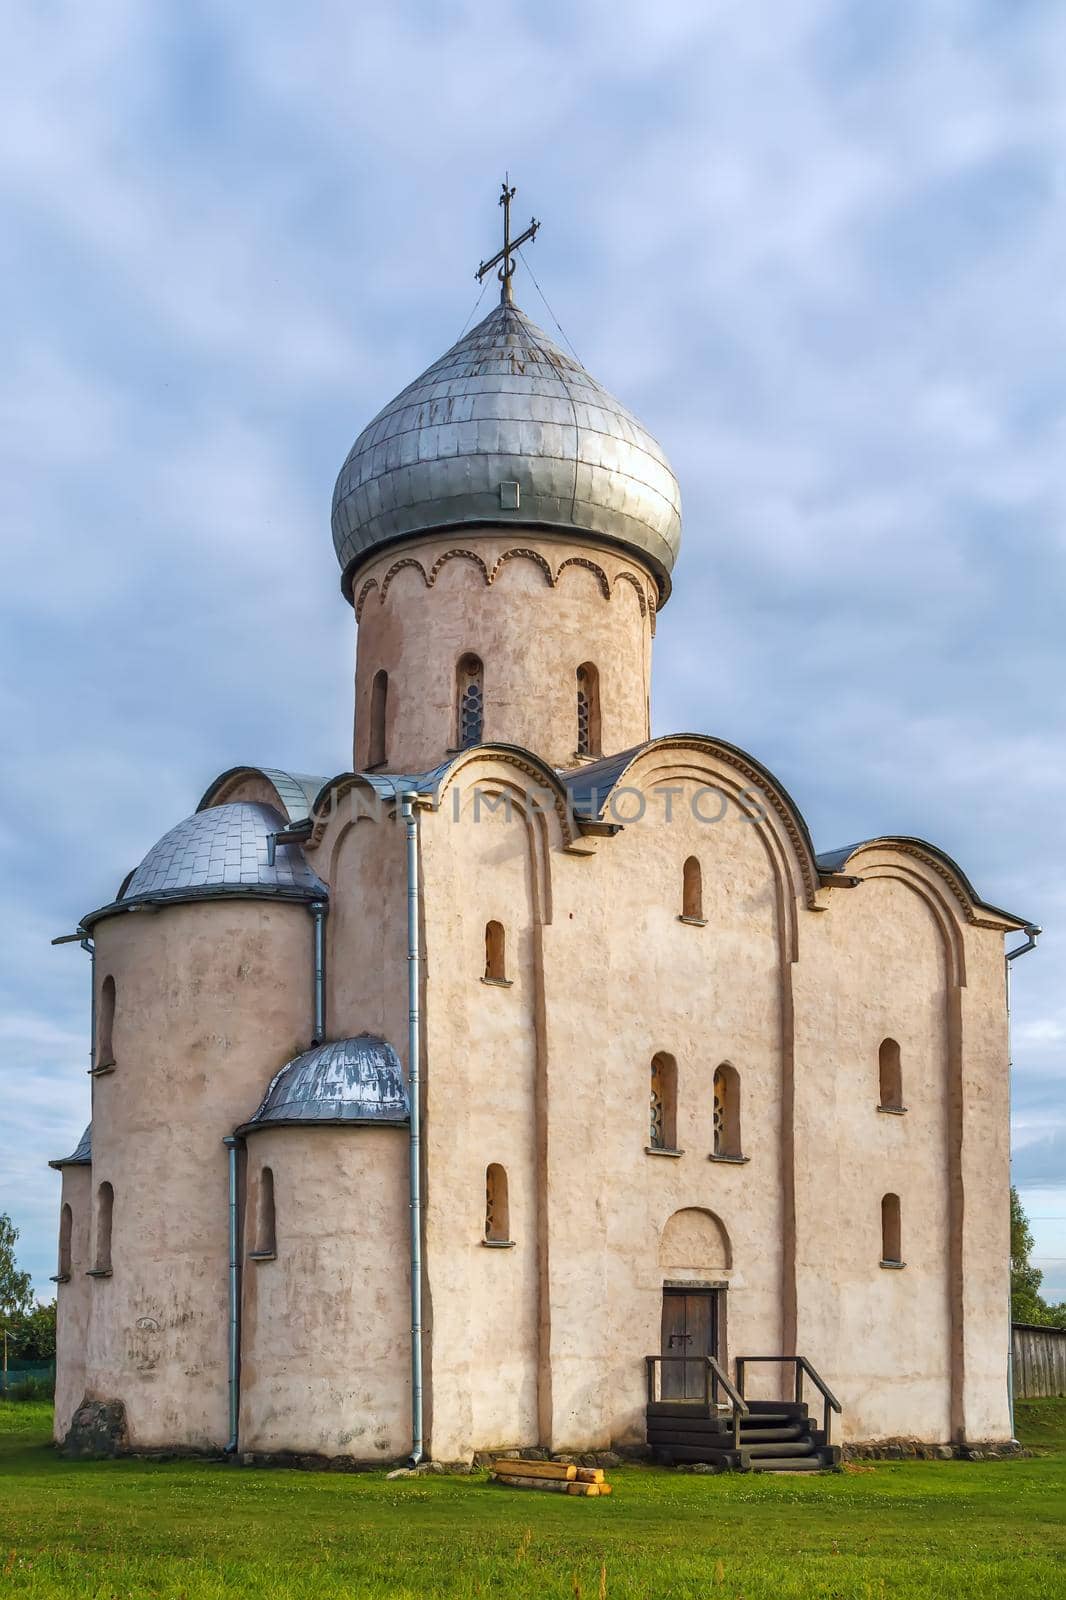 Church of Our Savior on Nereditsa Hill, 1198  is world famous church in Veliky Novgorod, Russia